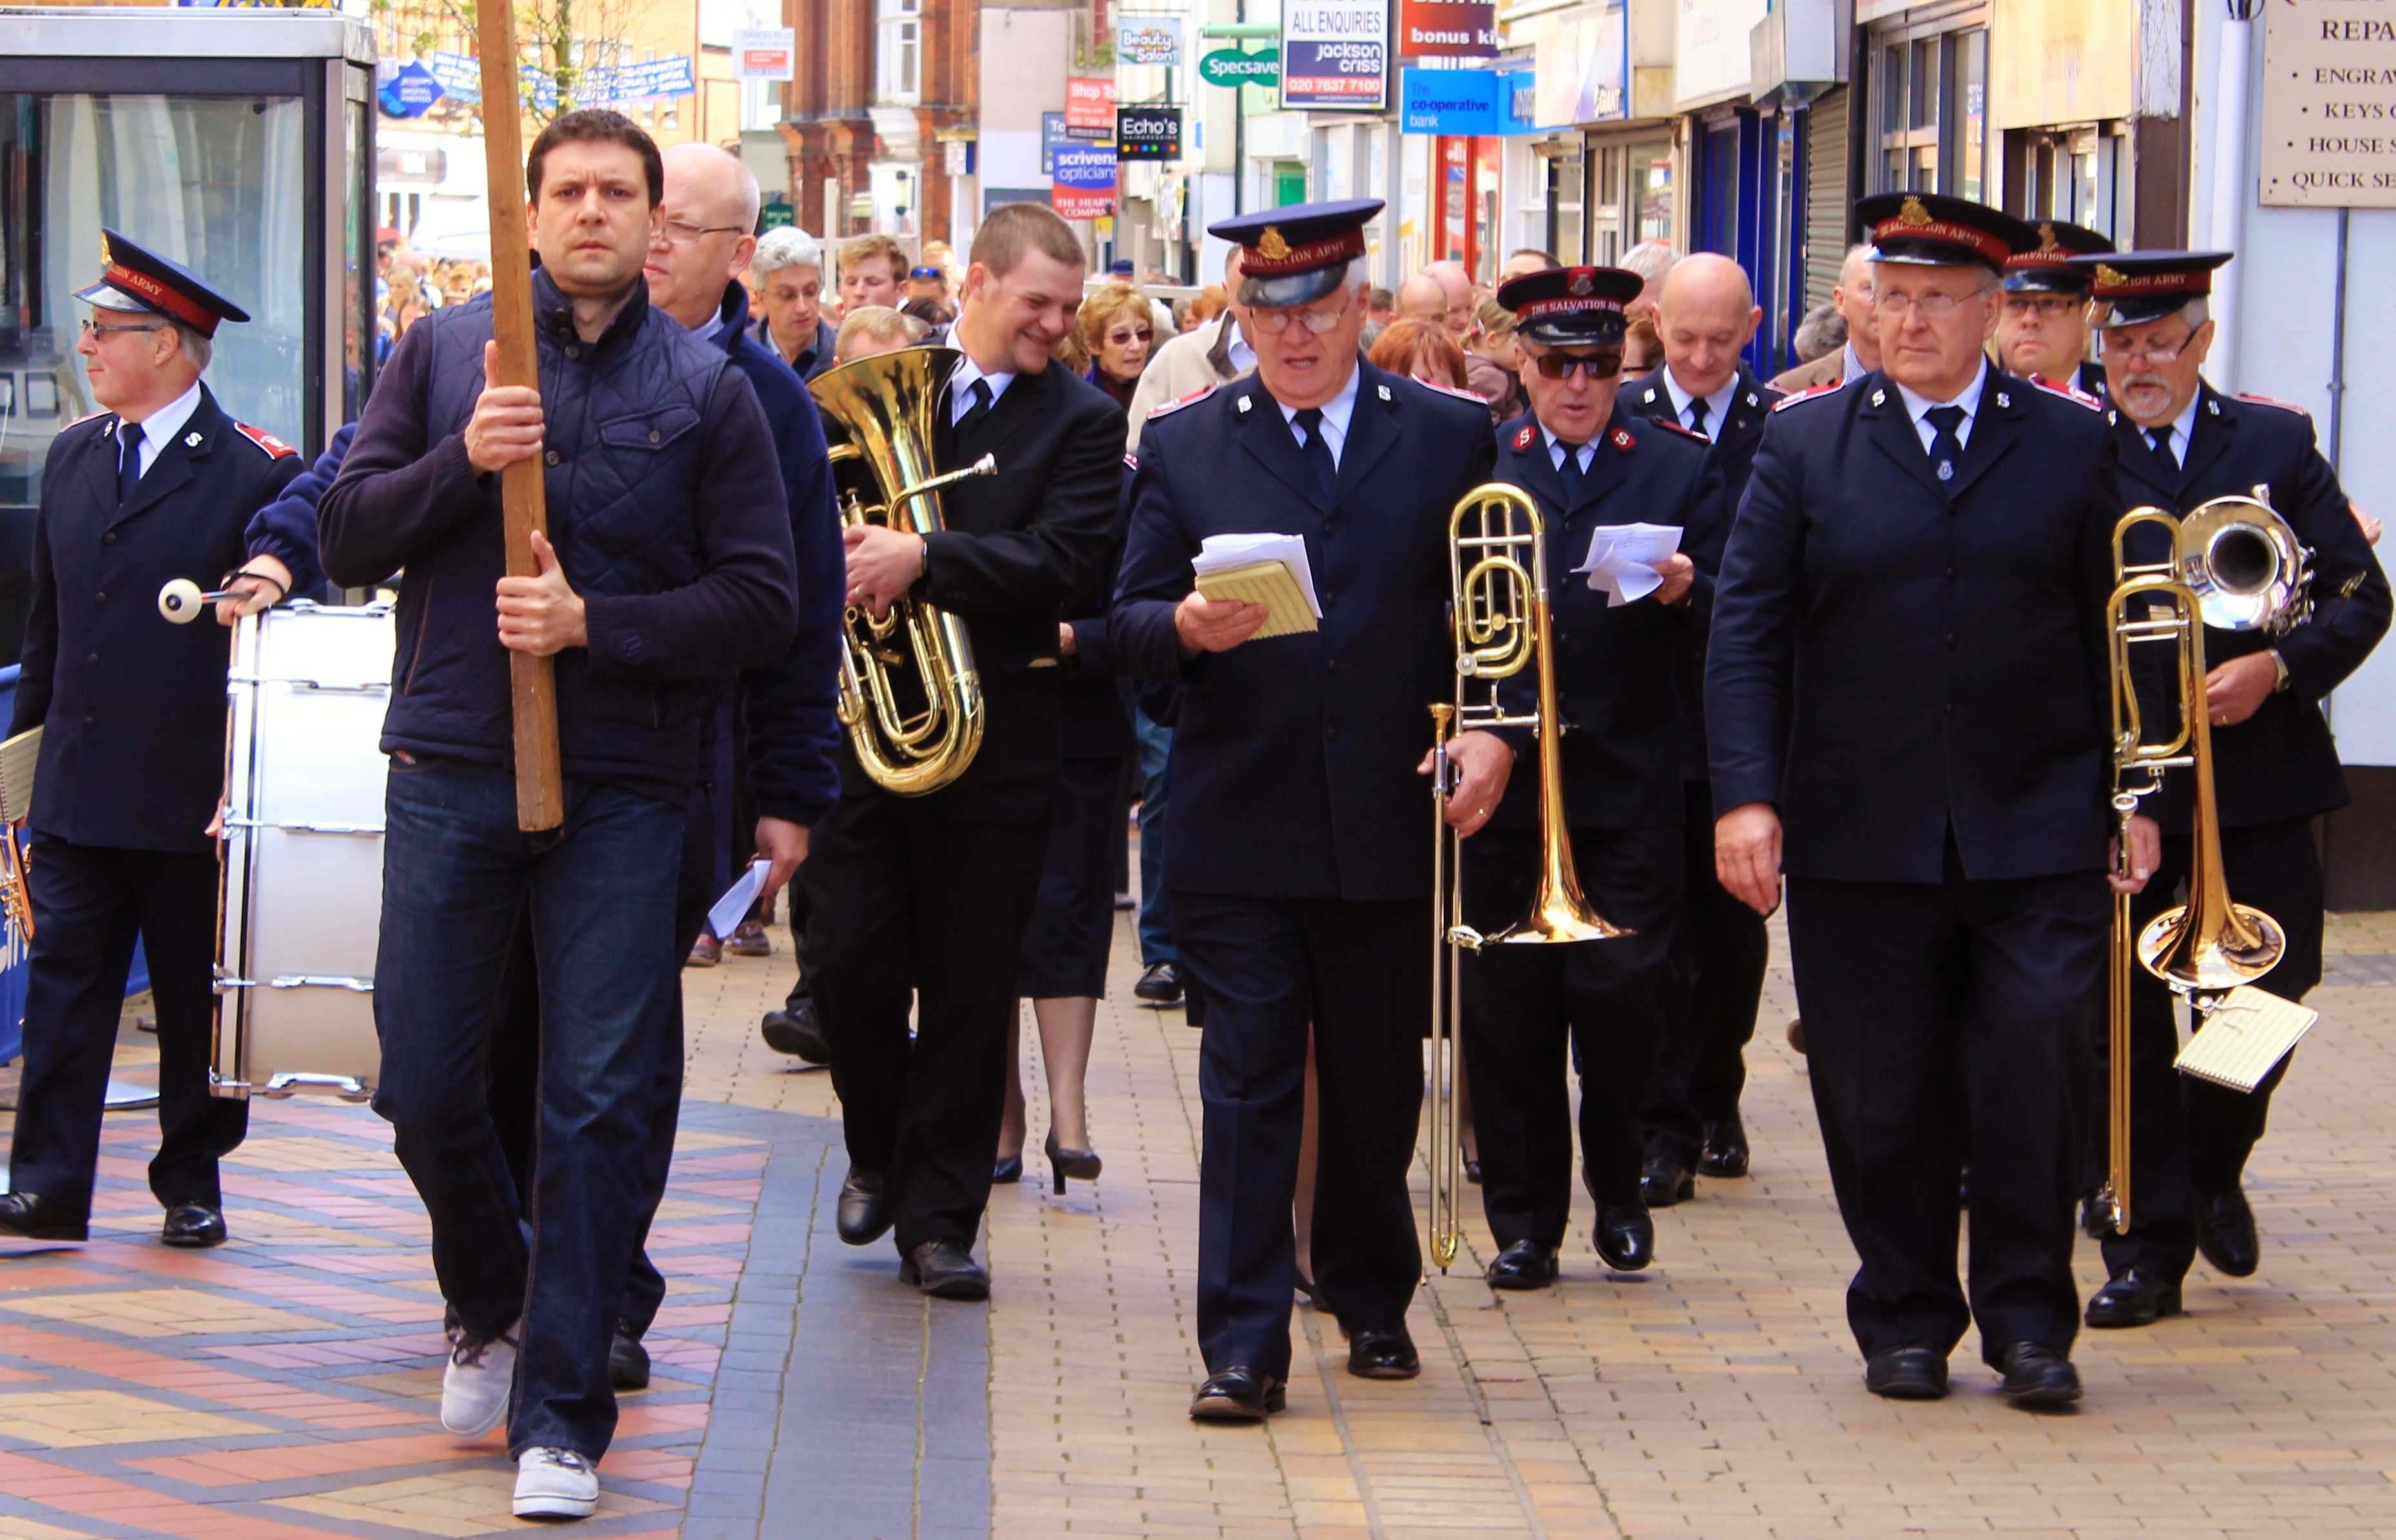 Walking up Maidenhead High Street, the Salvation Army lead the Walk of Witness procession.